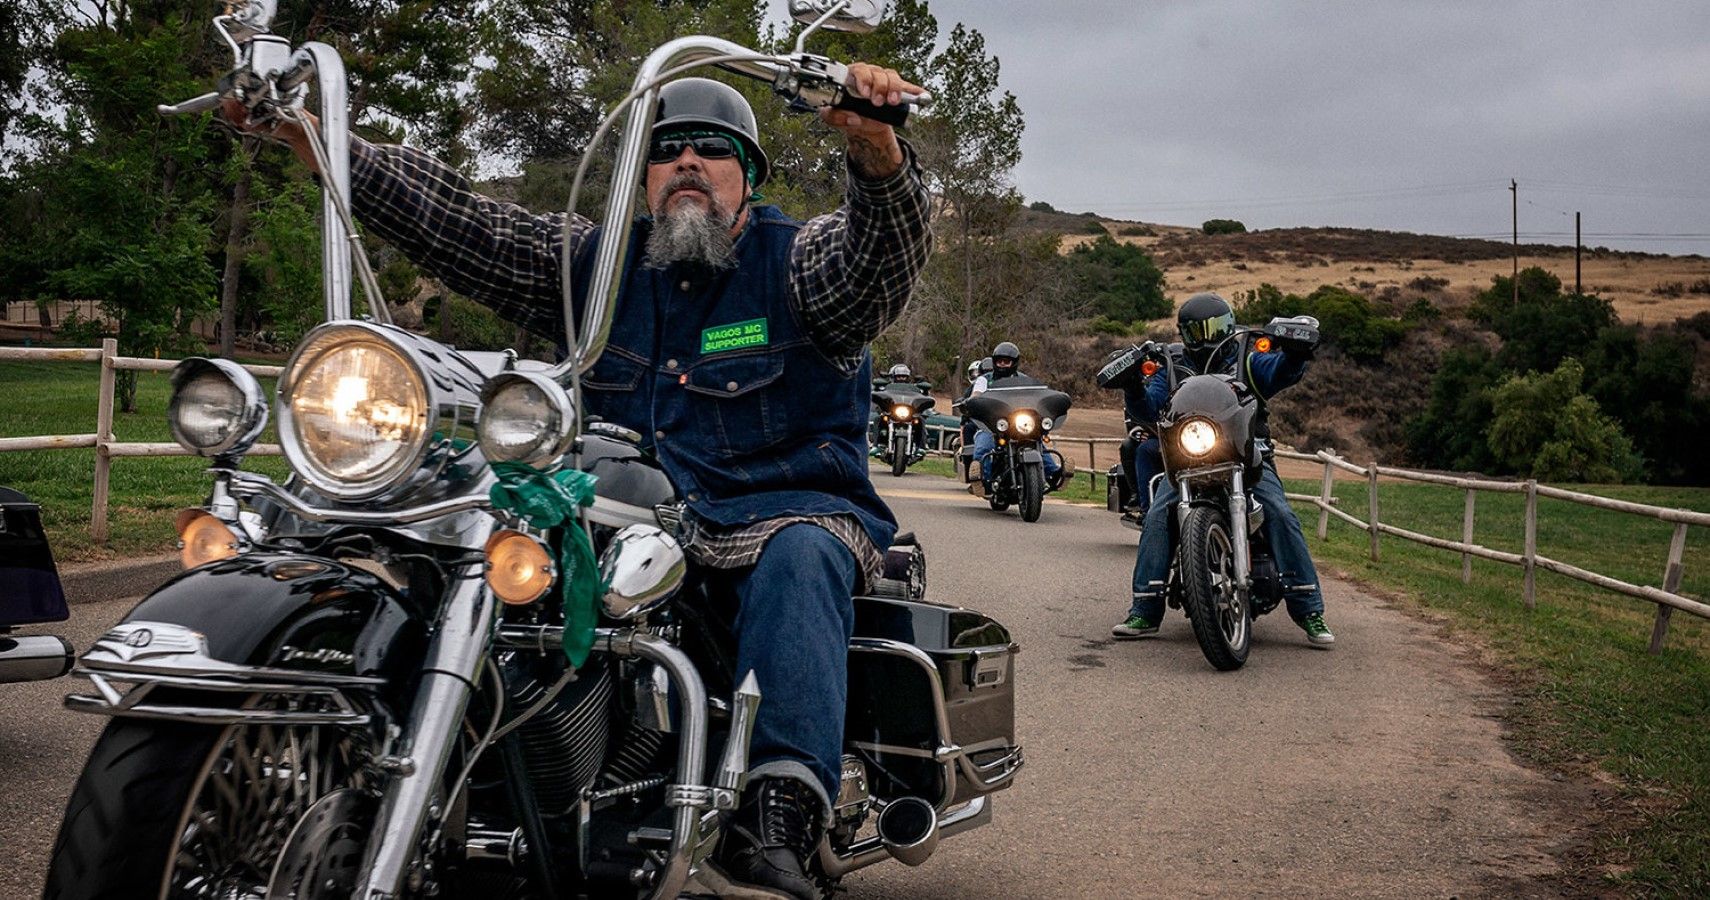 How I Infiltrated the Vagos, a Dangerous L.A. Motorcycle Gang